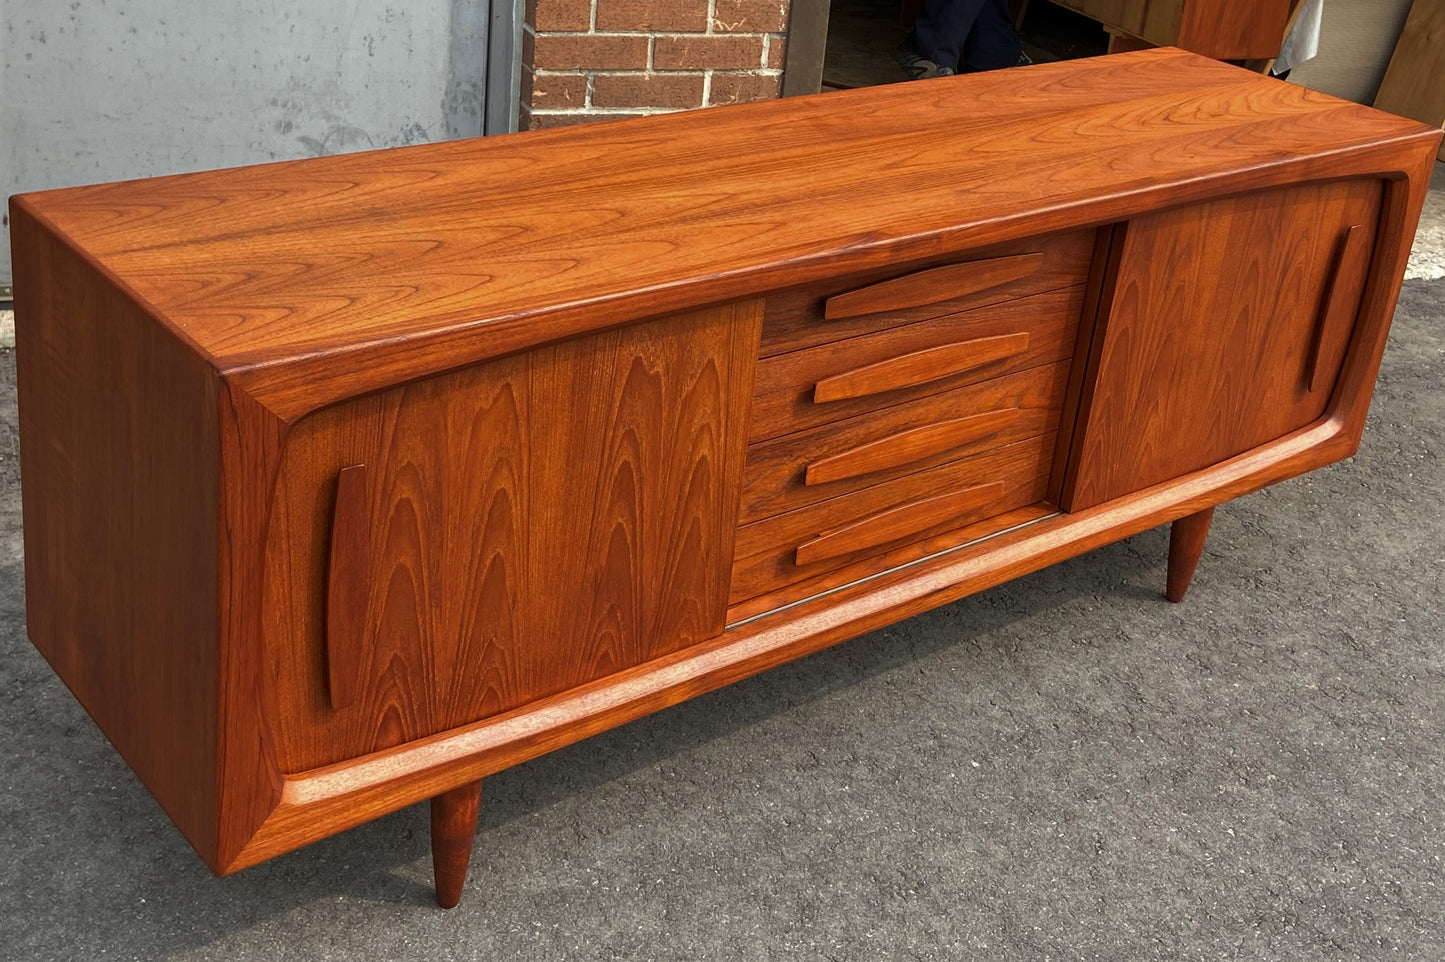 REFINISHED Danish MCM Teak sideboard Credenza TV Console 6 ft PERFECT